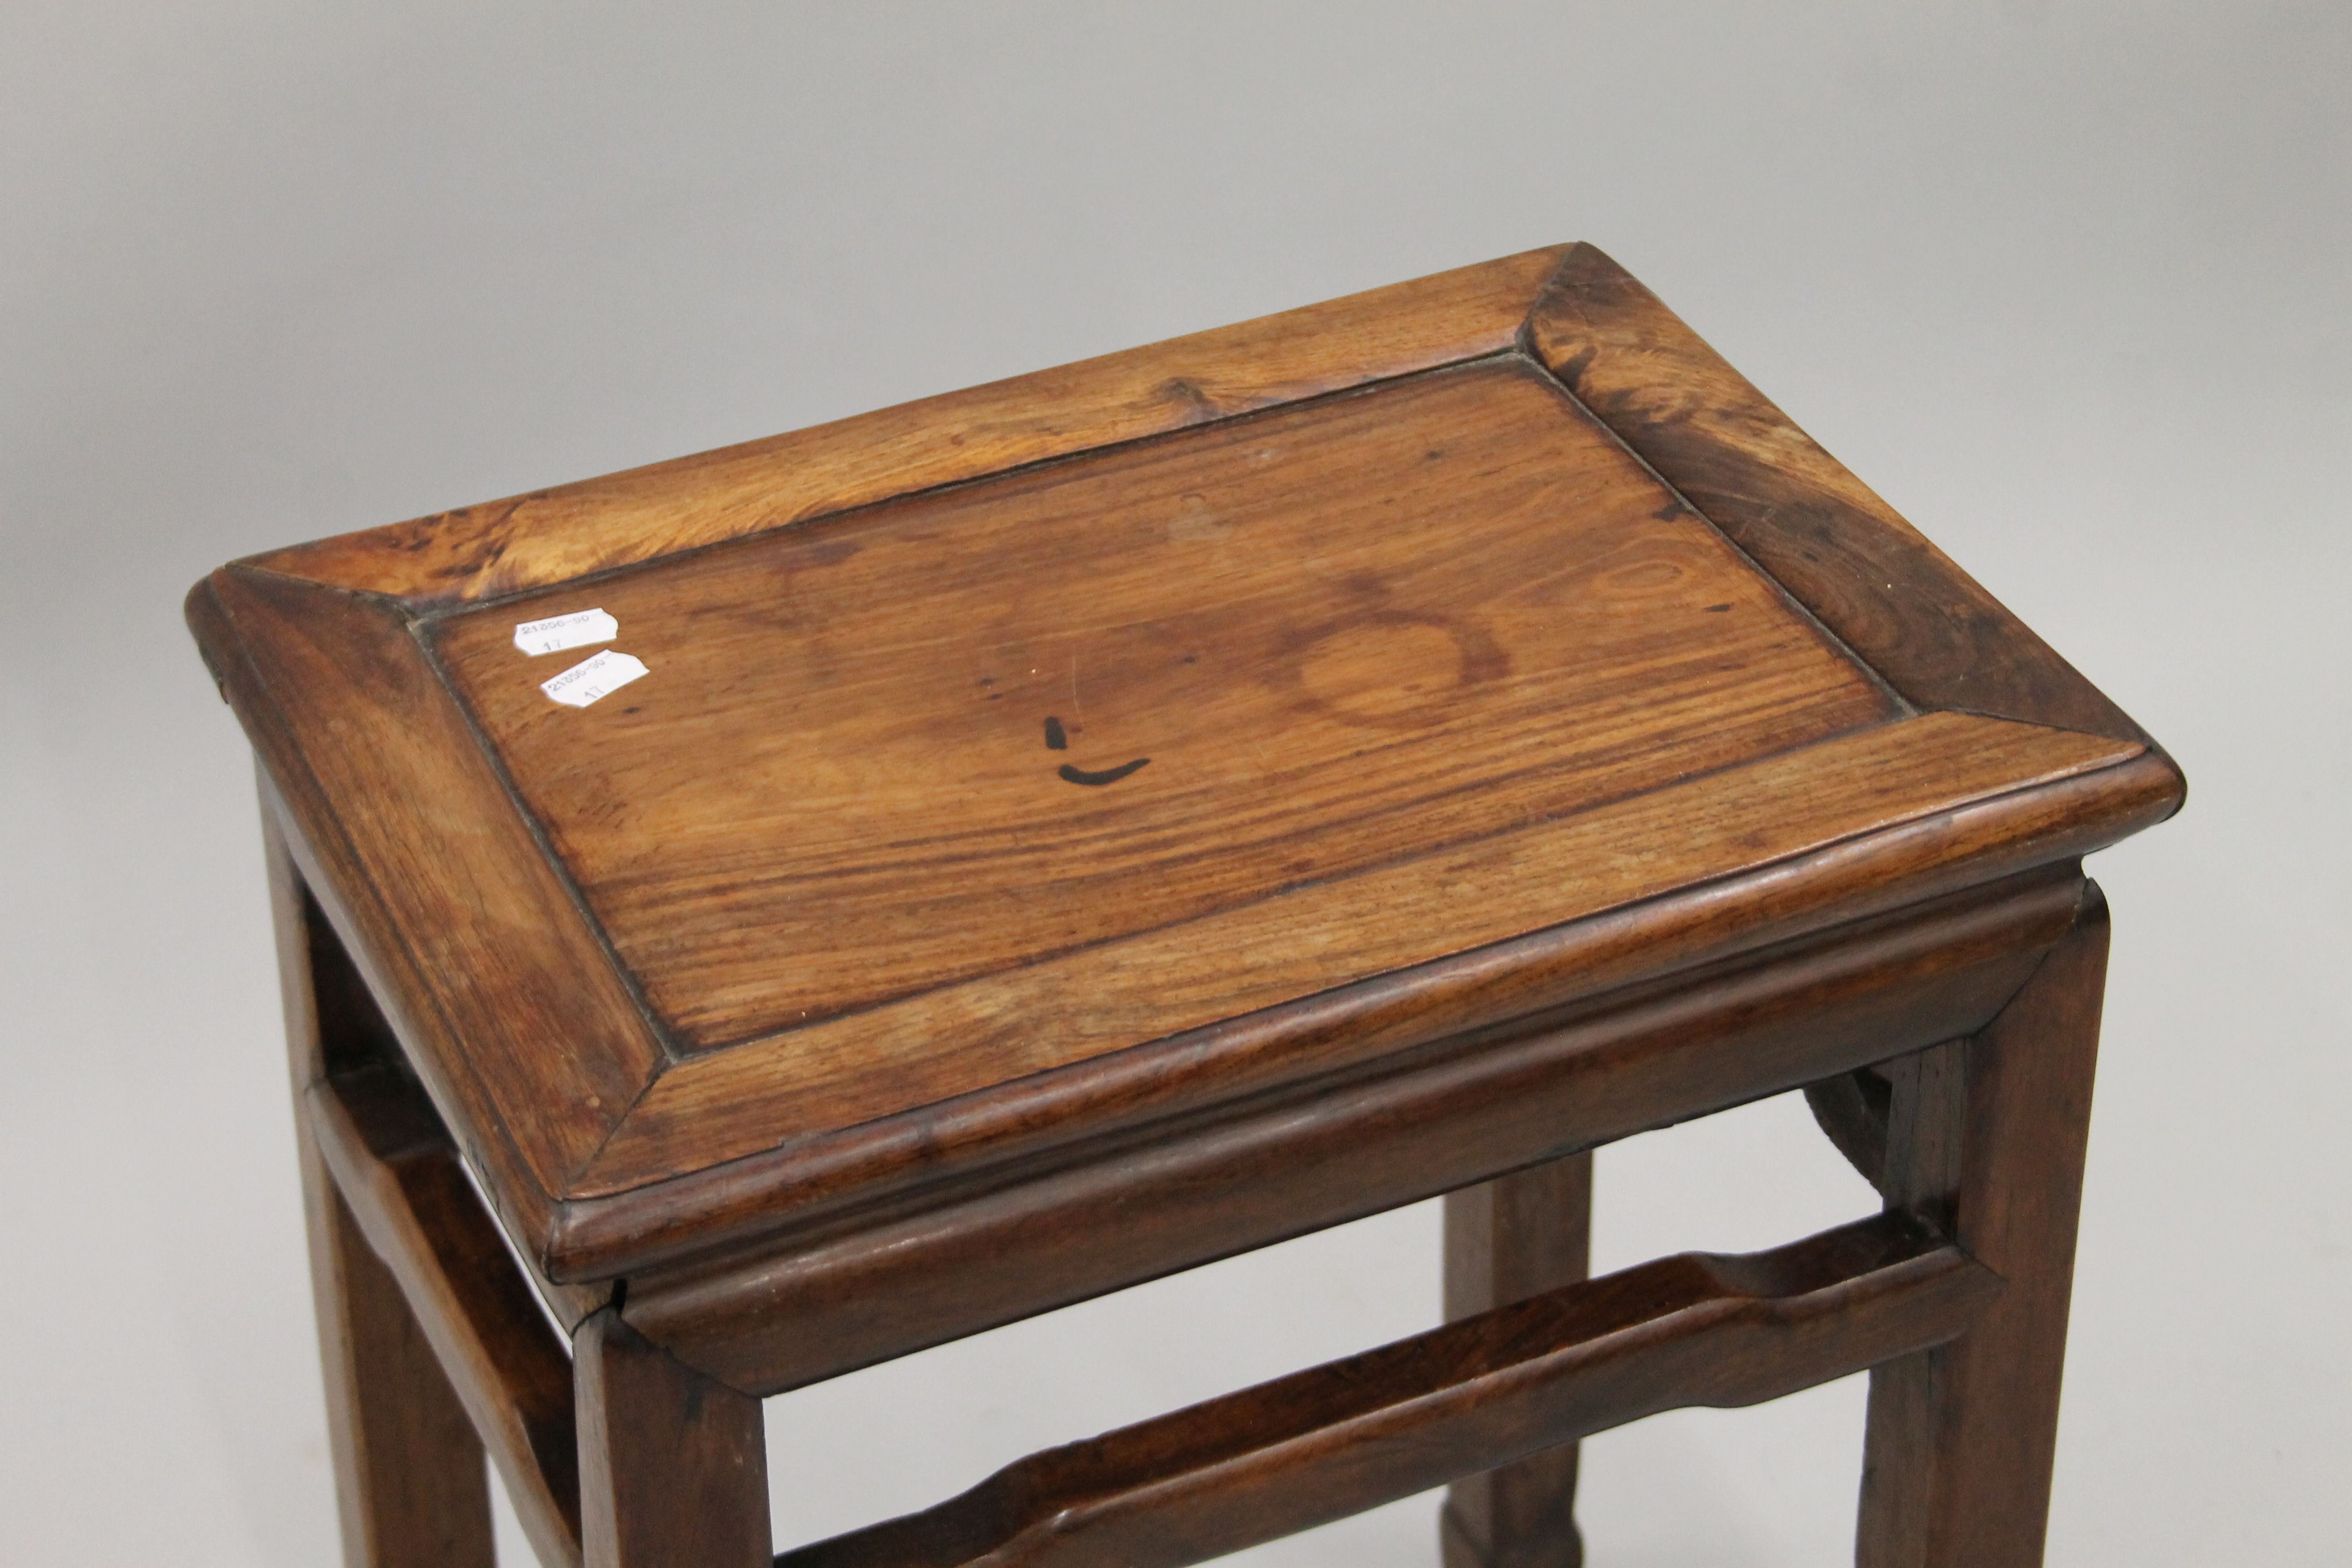 A 19th century Chinese rectangular hardwood stand. 50 cm high. - Image 3 of 5